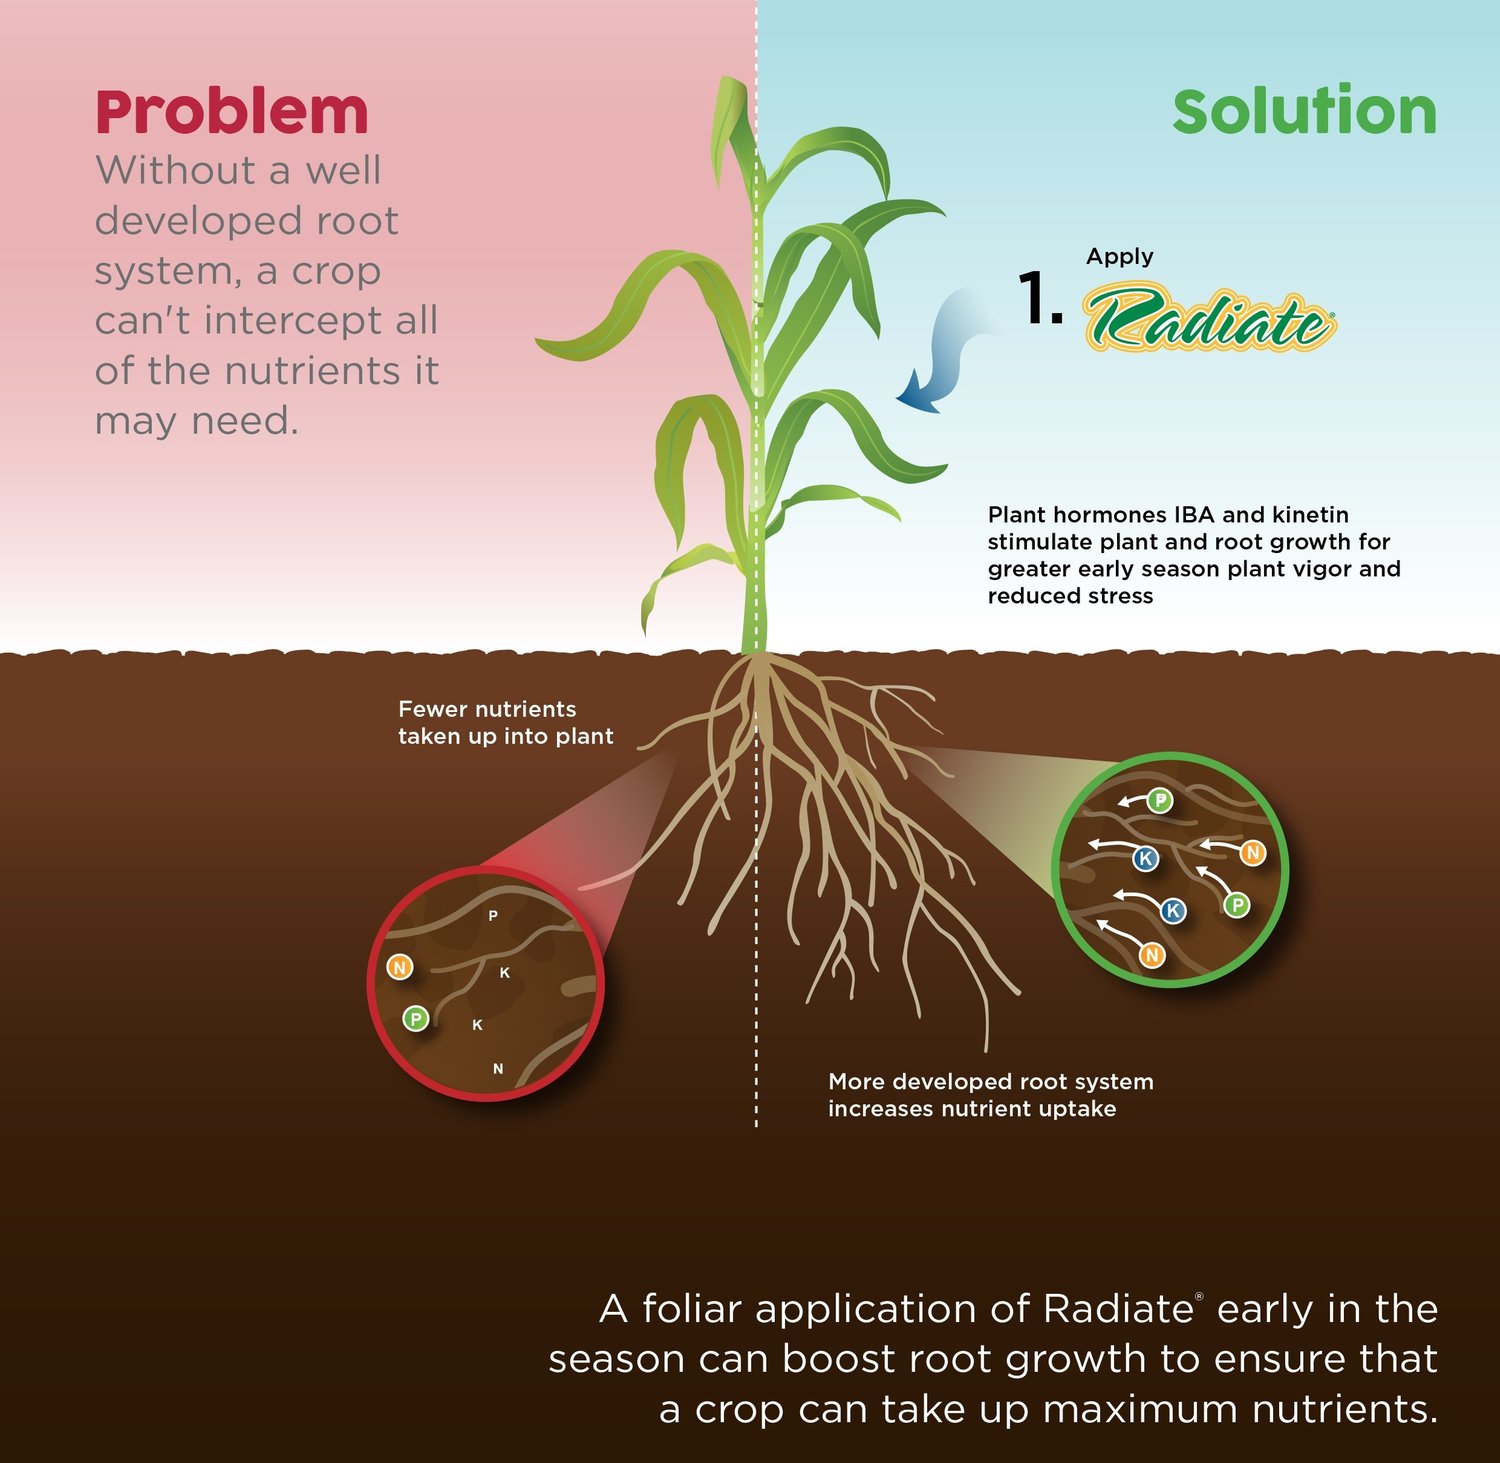 How Do IBA, Kinetin & Nutrient Mobilization Impact Crop Performance?